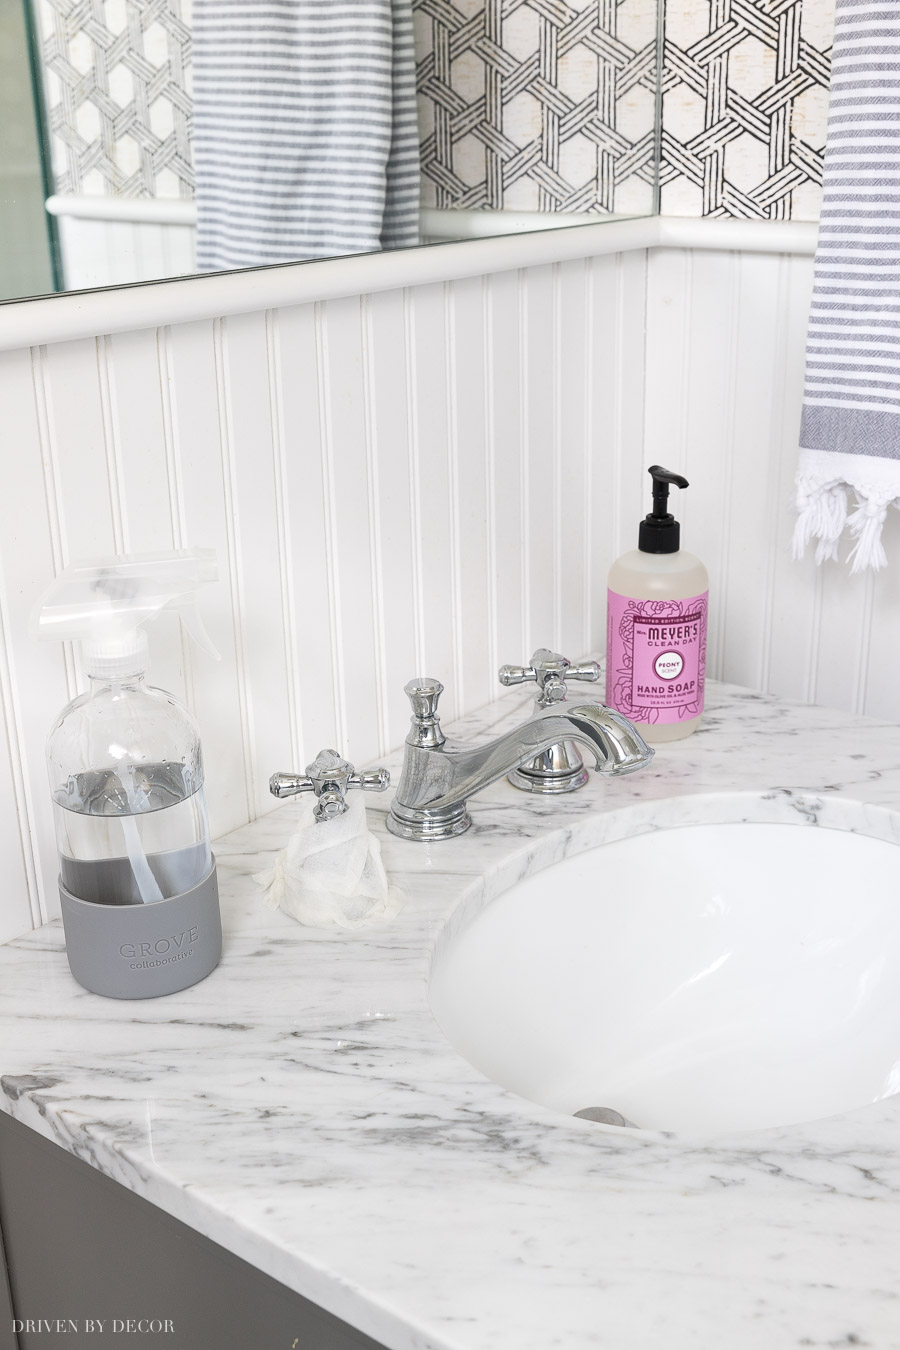 My simple hack for cleaning mineral deposits off of faucets (plus a link to the awesome spray bottle!)